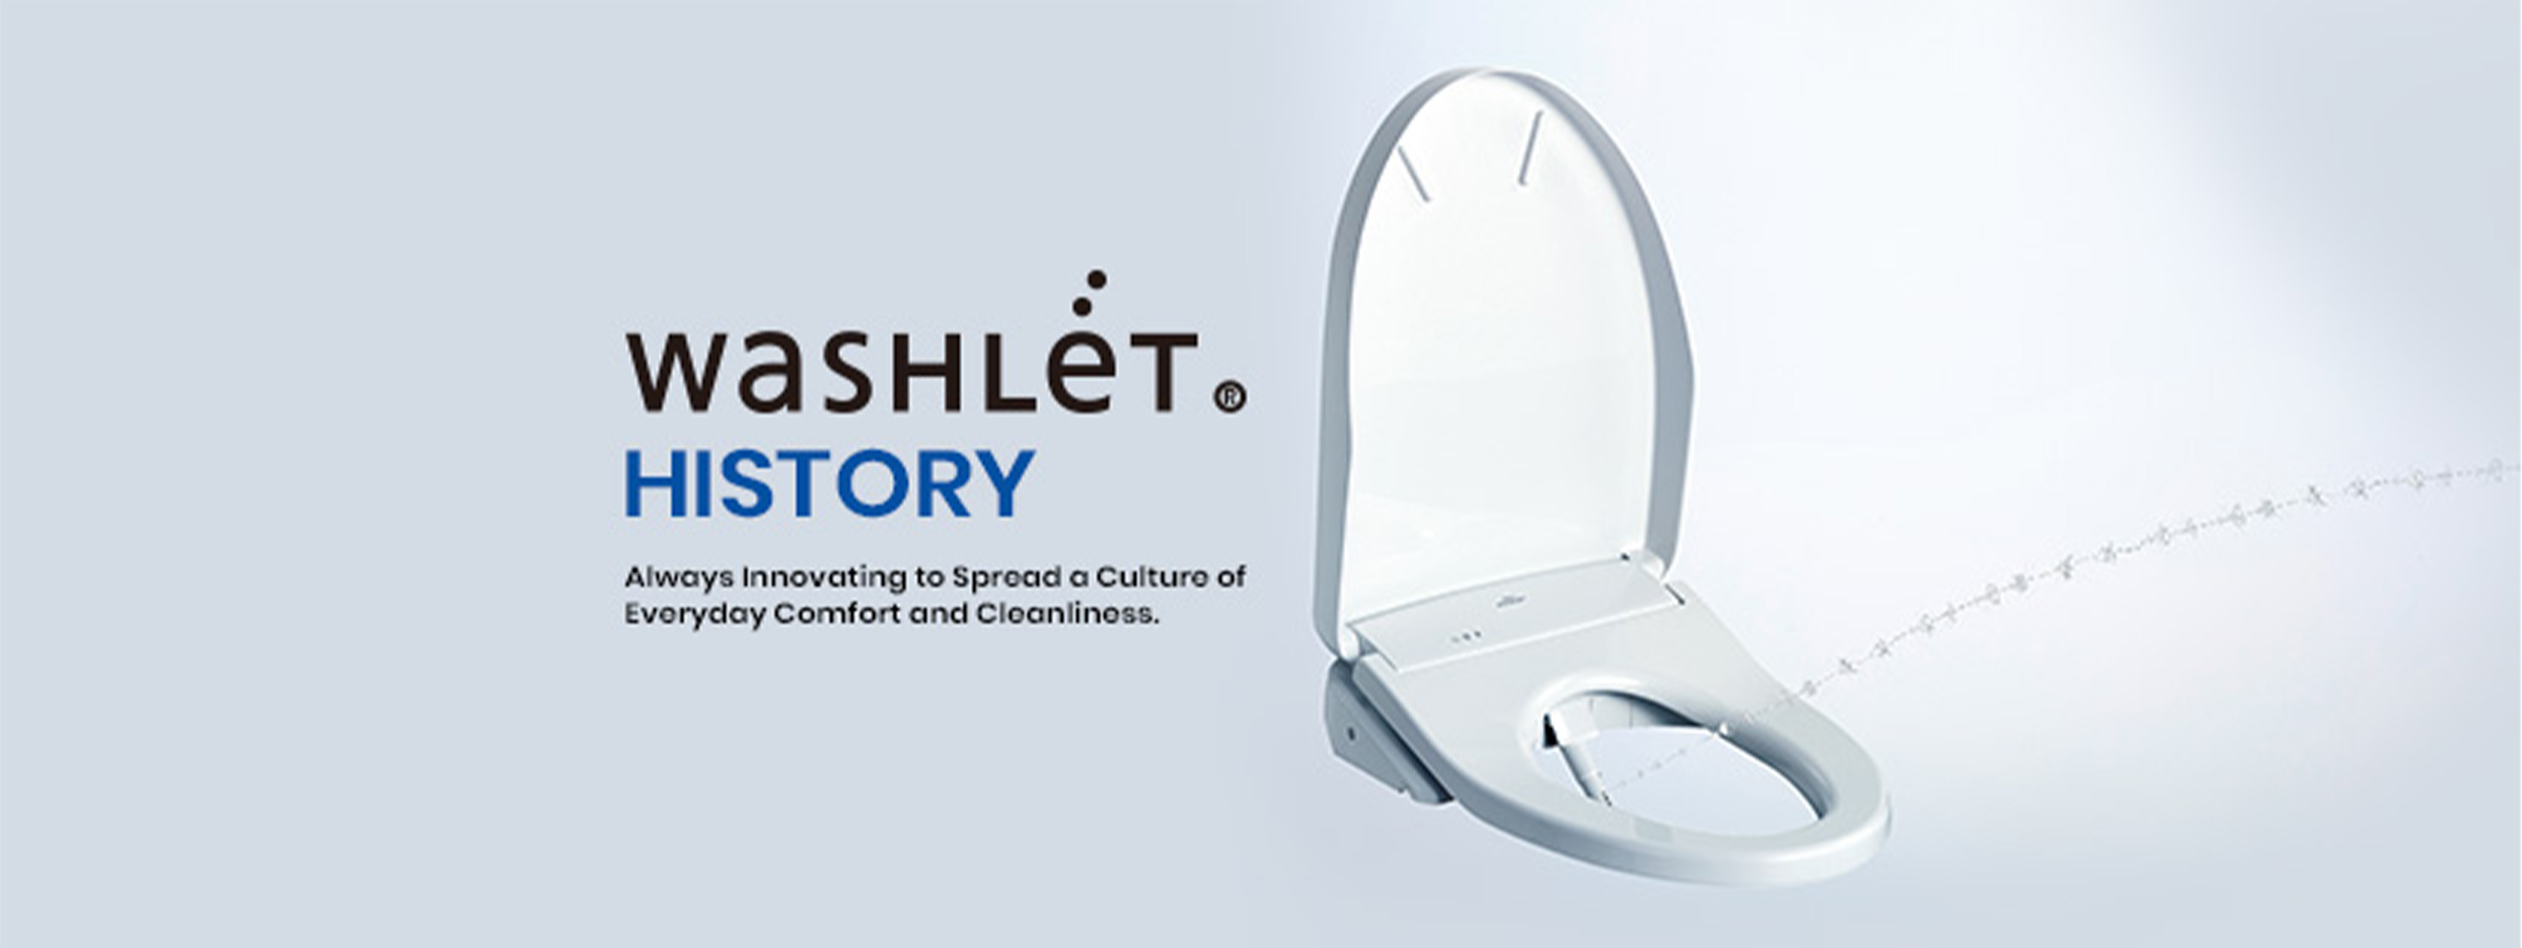 WASHLET®️ HISTORY.Always Innovating to Spread a Culture of Everyday Comfort and Cleanliness.